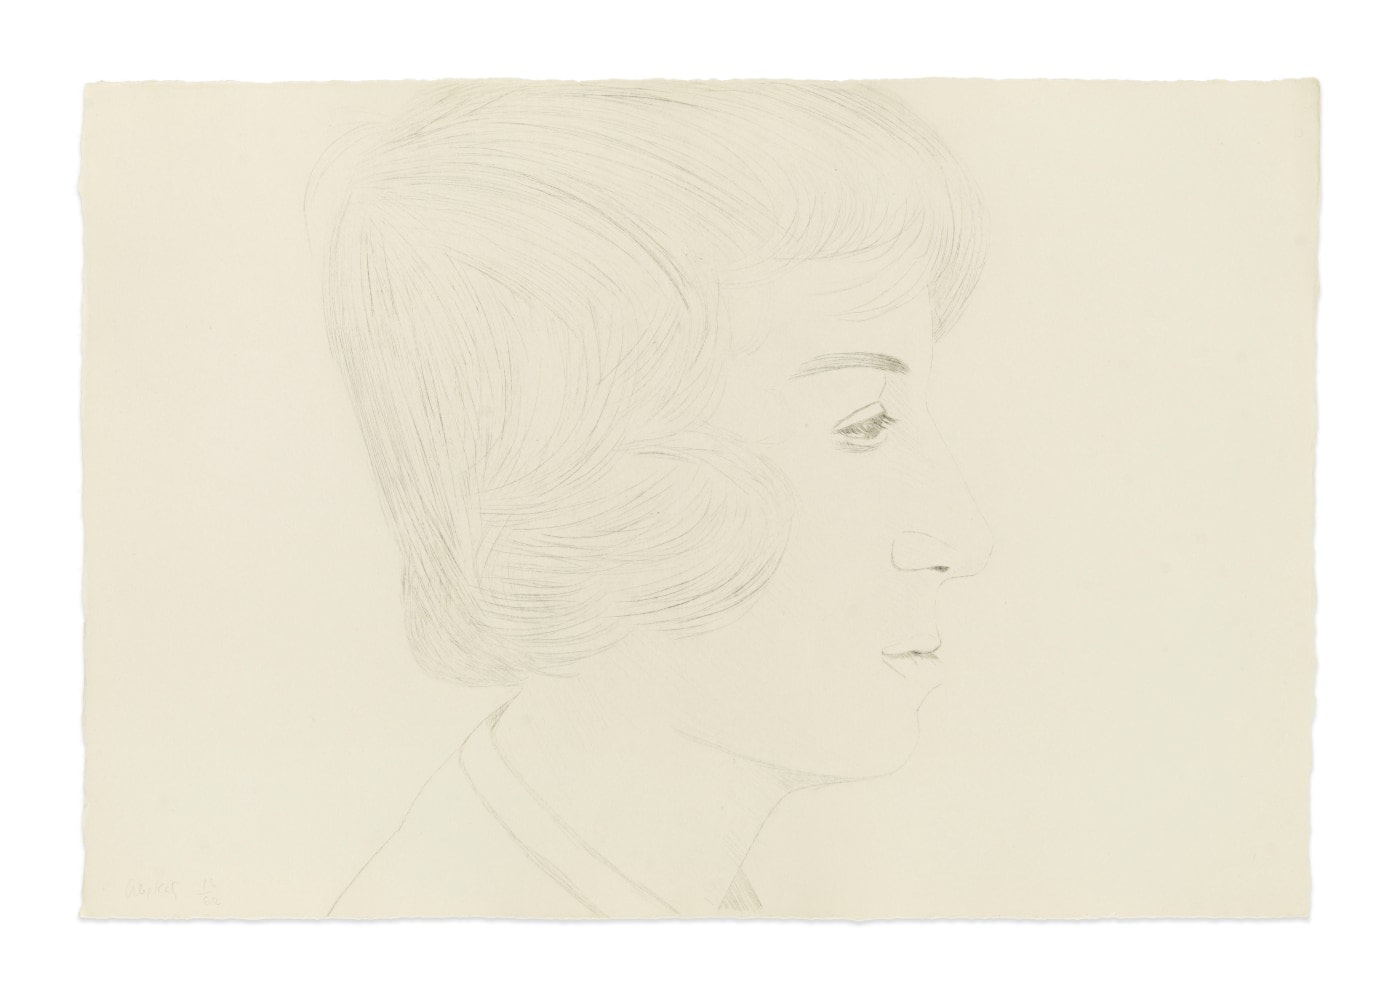 Profile of Vincent, 1974

drypoint, edition of 62

15 x 22 in. / 38.1 x 55.9 cm